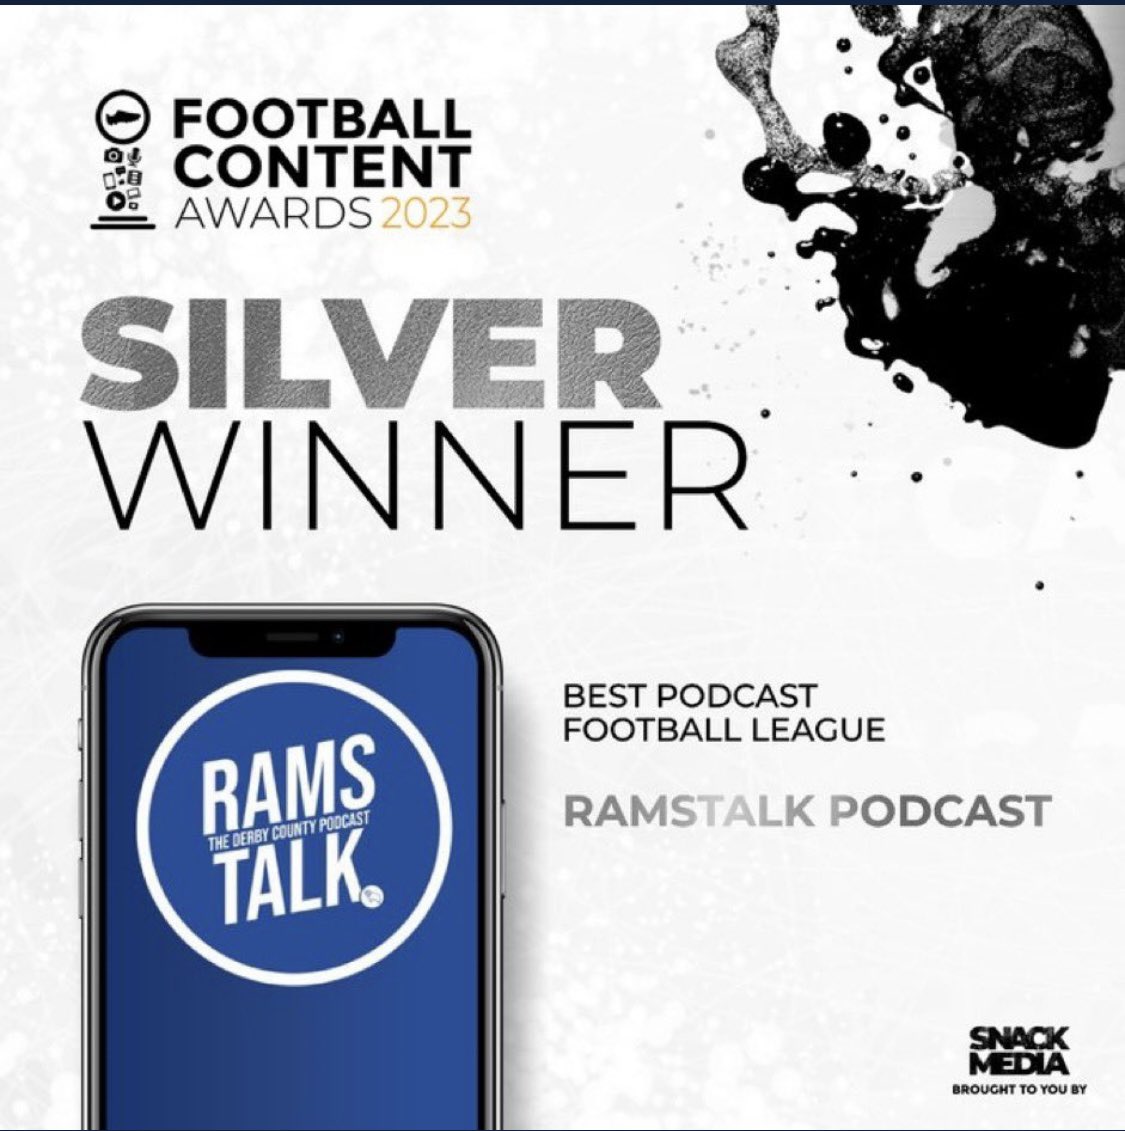 The award winning @RamsTalkPod A fantastic night at the @The_FCAs with so much talent in the football content world We won the silver award for best pod football league. All thanks to God, everyone that’s supported us and most importantly the lads! Long may it continue 🐏 #dcfc